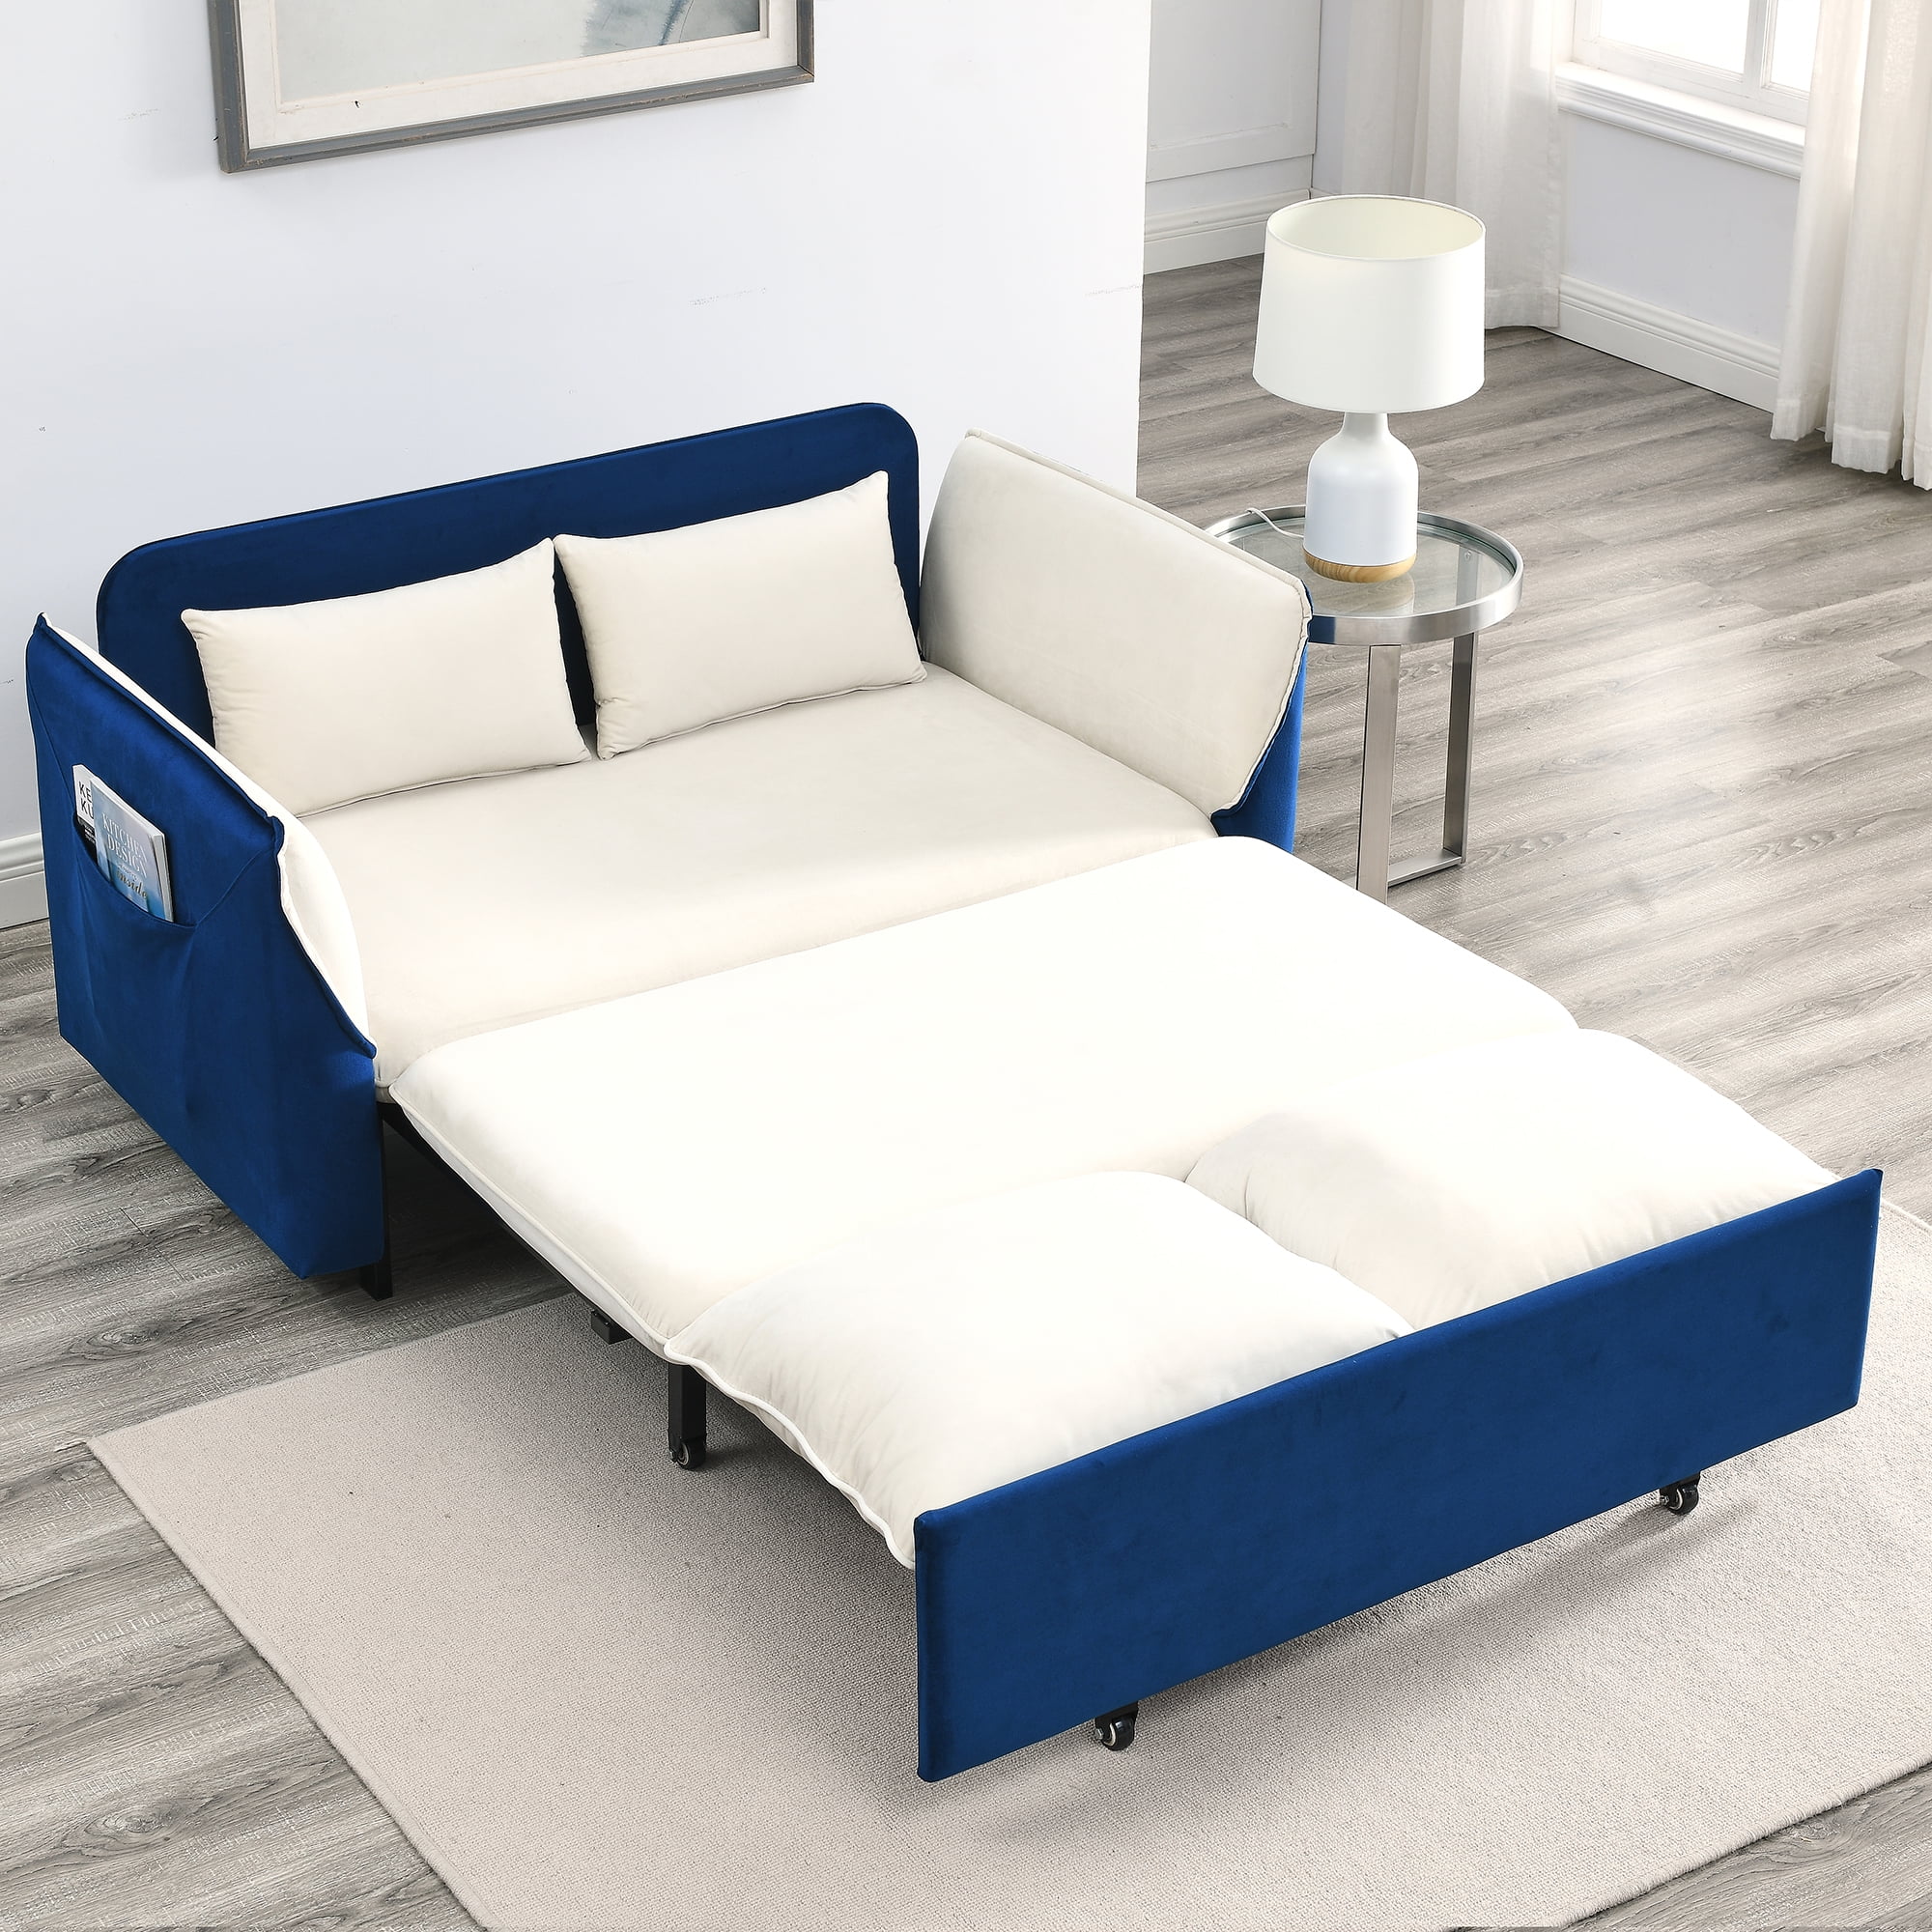 Muumblus 57" Pull Out Sofa Bed, Modern Convertible Sleeper Sofa with Pull Out Couch, Loveseat Sleeper for Living Room/Small Spaces, Blue